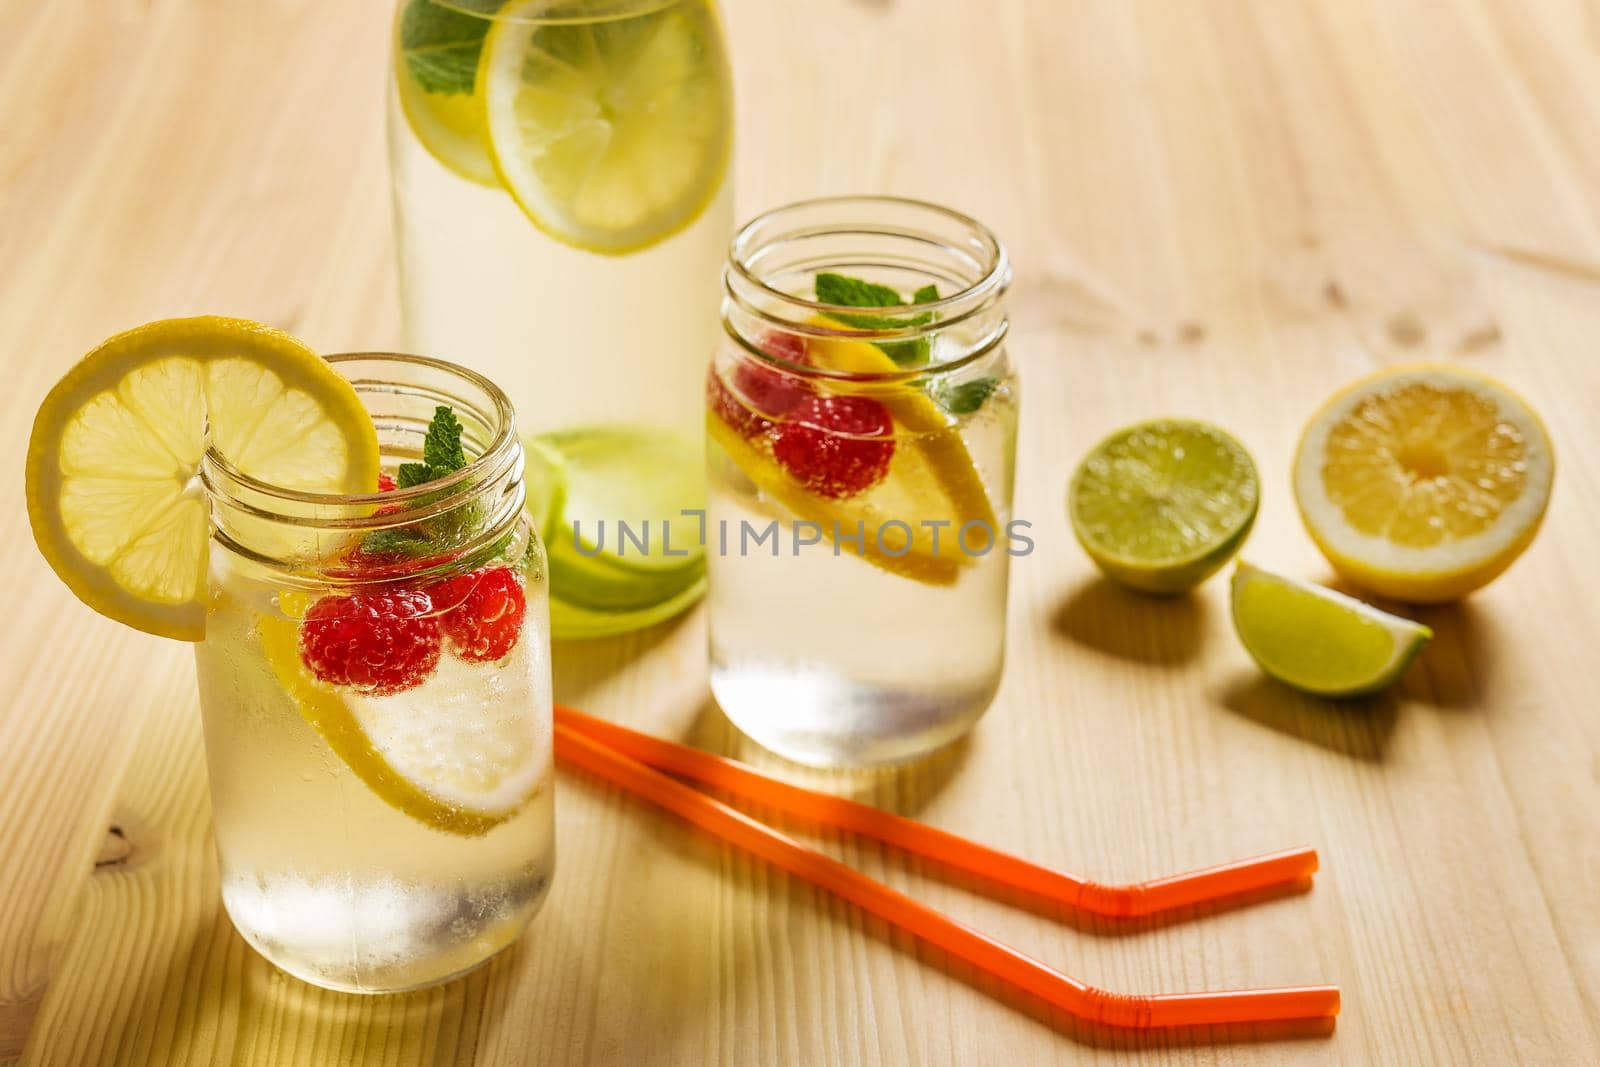 a bottle and two glass jars with cold water, slices of lemon, red berries and mint on a wooden table with canes pieces of citrus lit by sunlight. Summer refreshment background with citrus